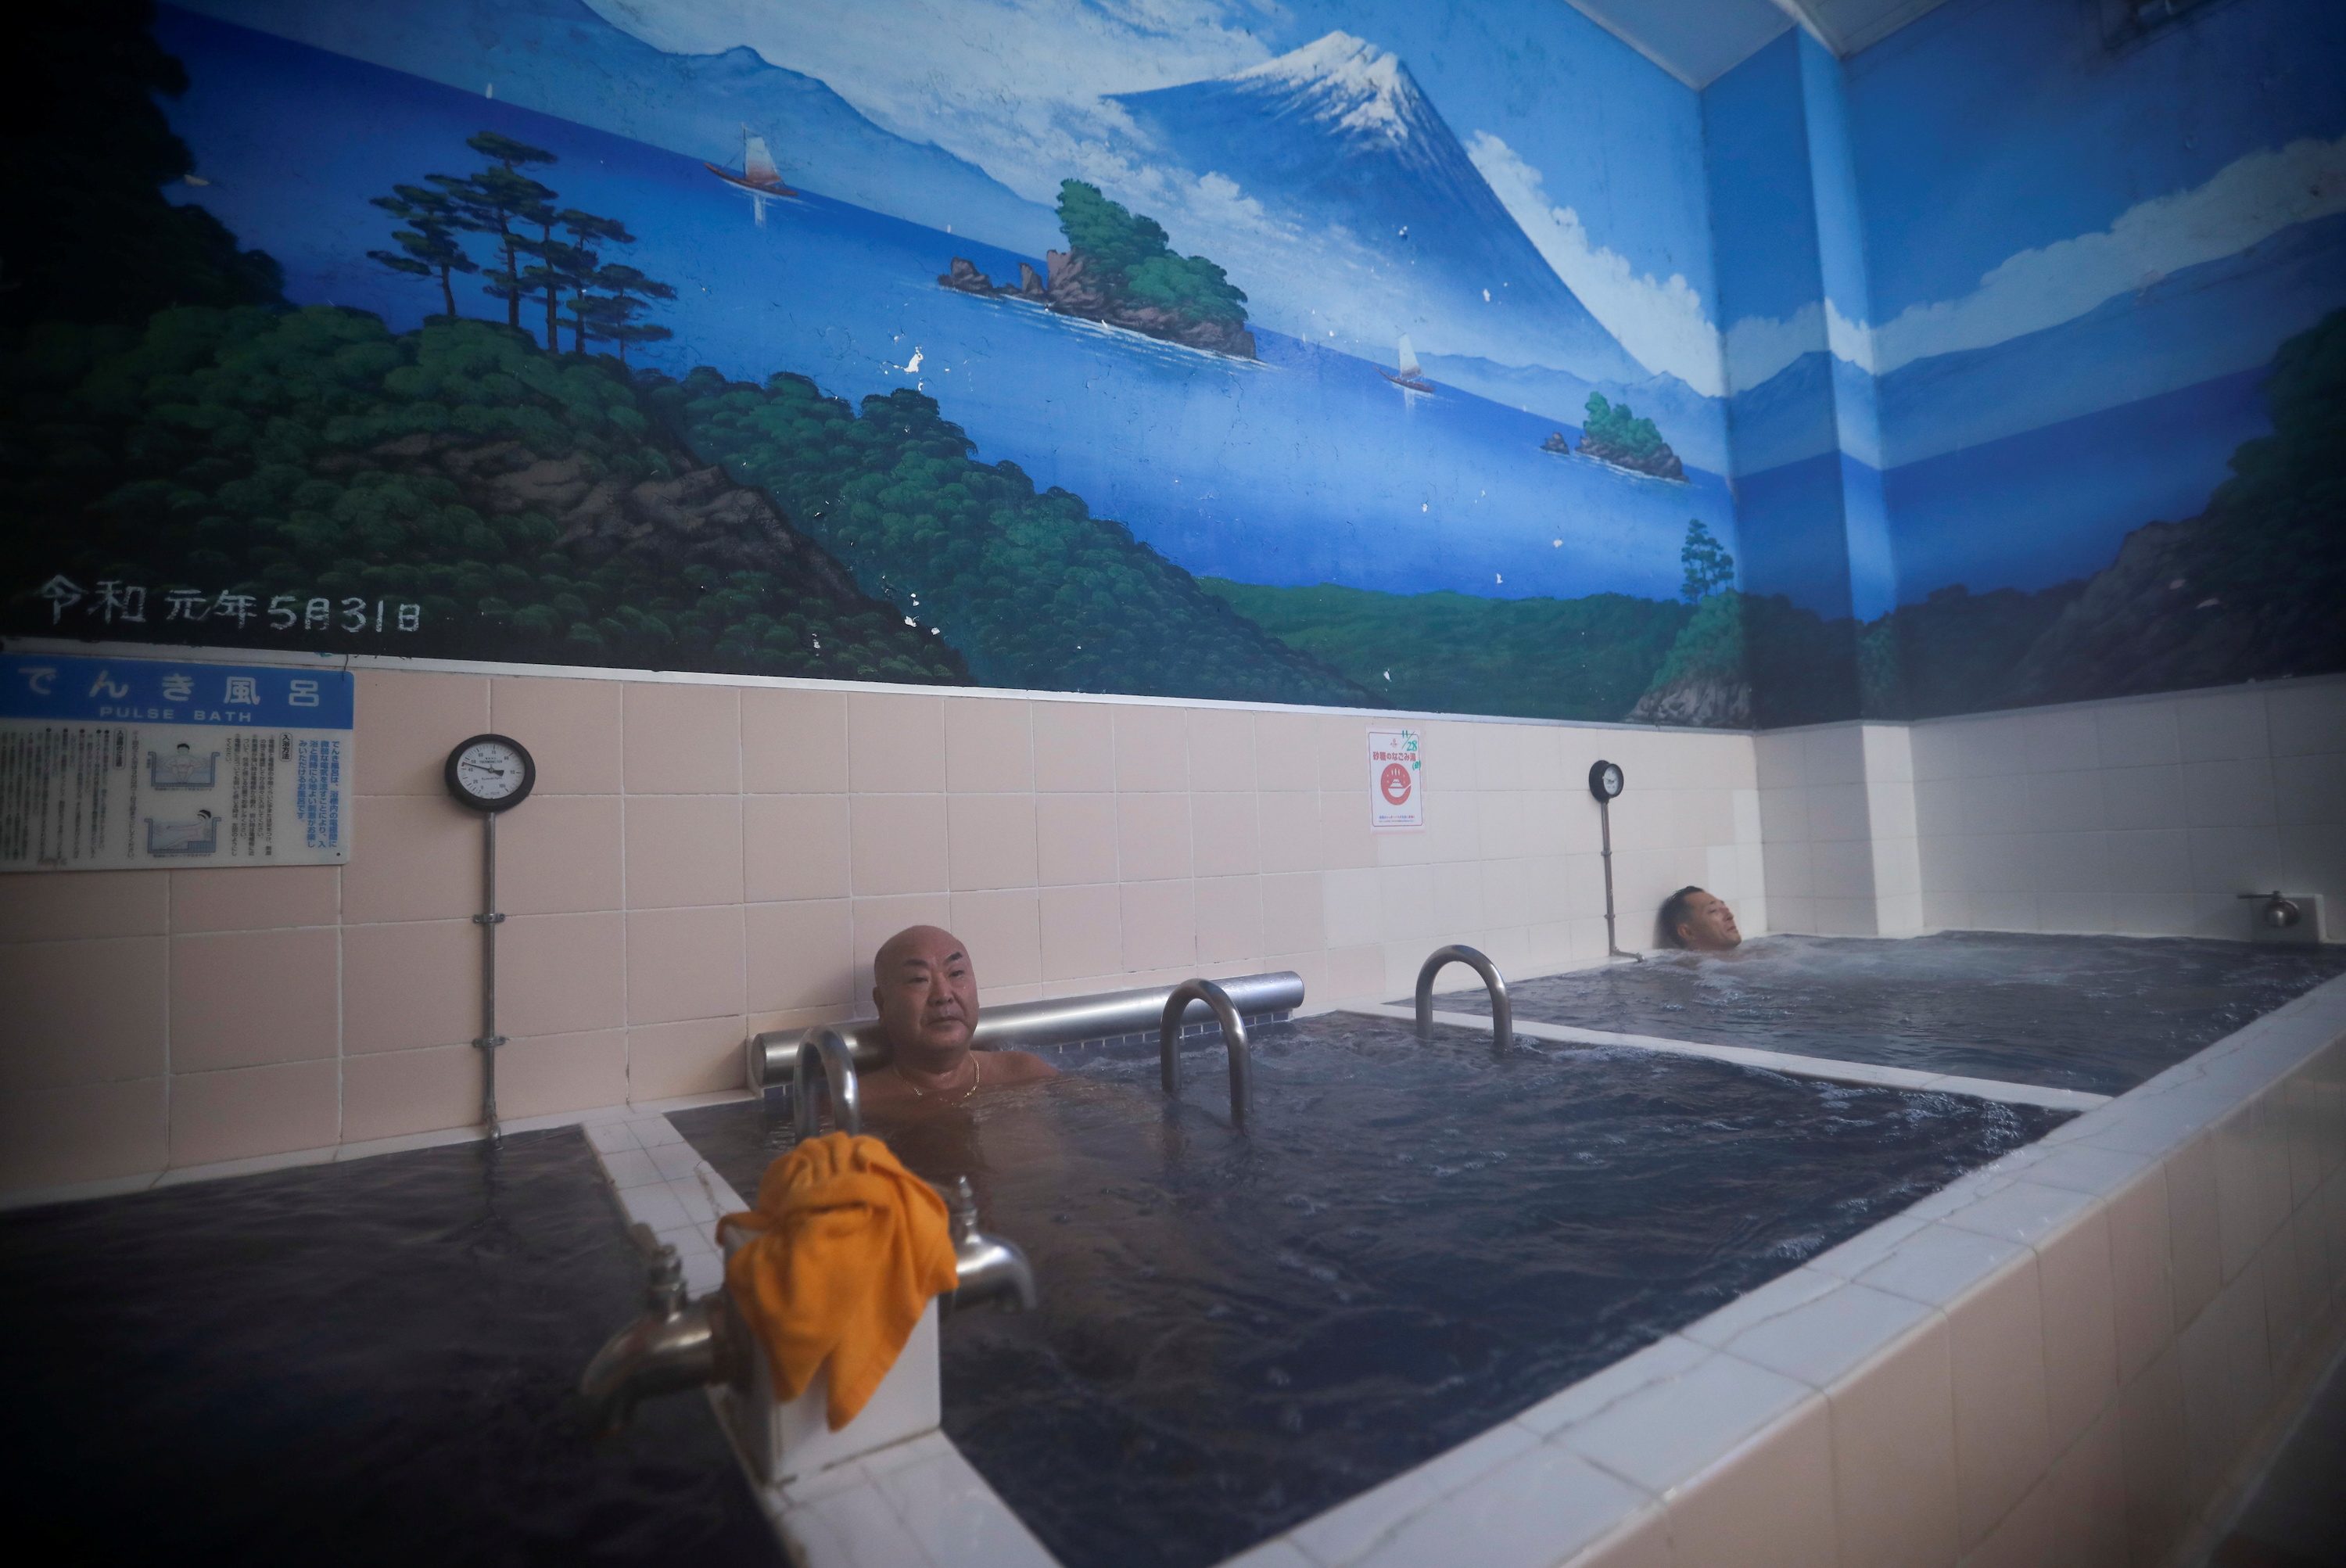 High oil prices could chill Japan’s traditional public baths